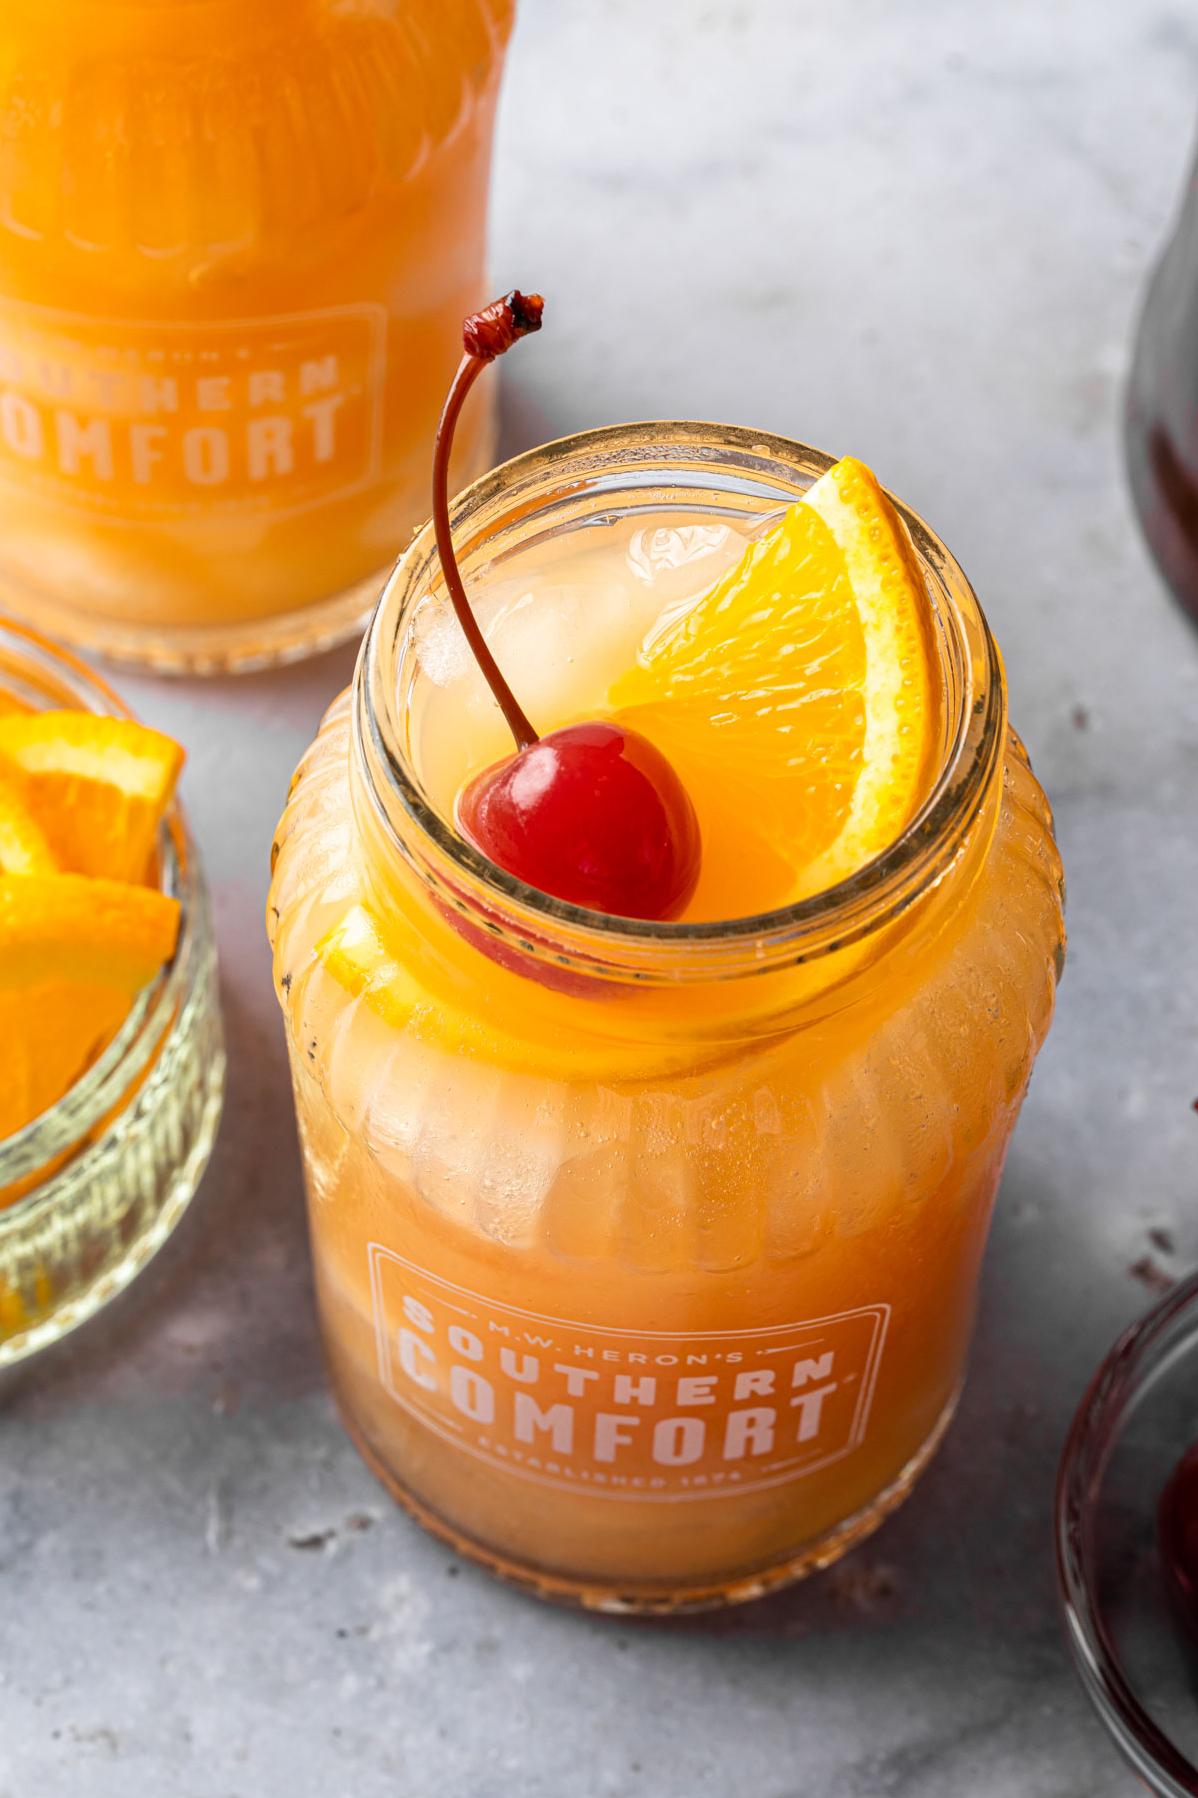  Raise your glass to this Southern Comfort Cobbler Cocktail!